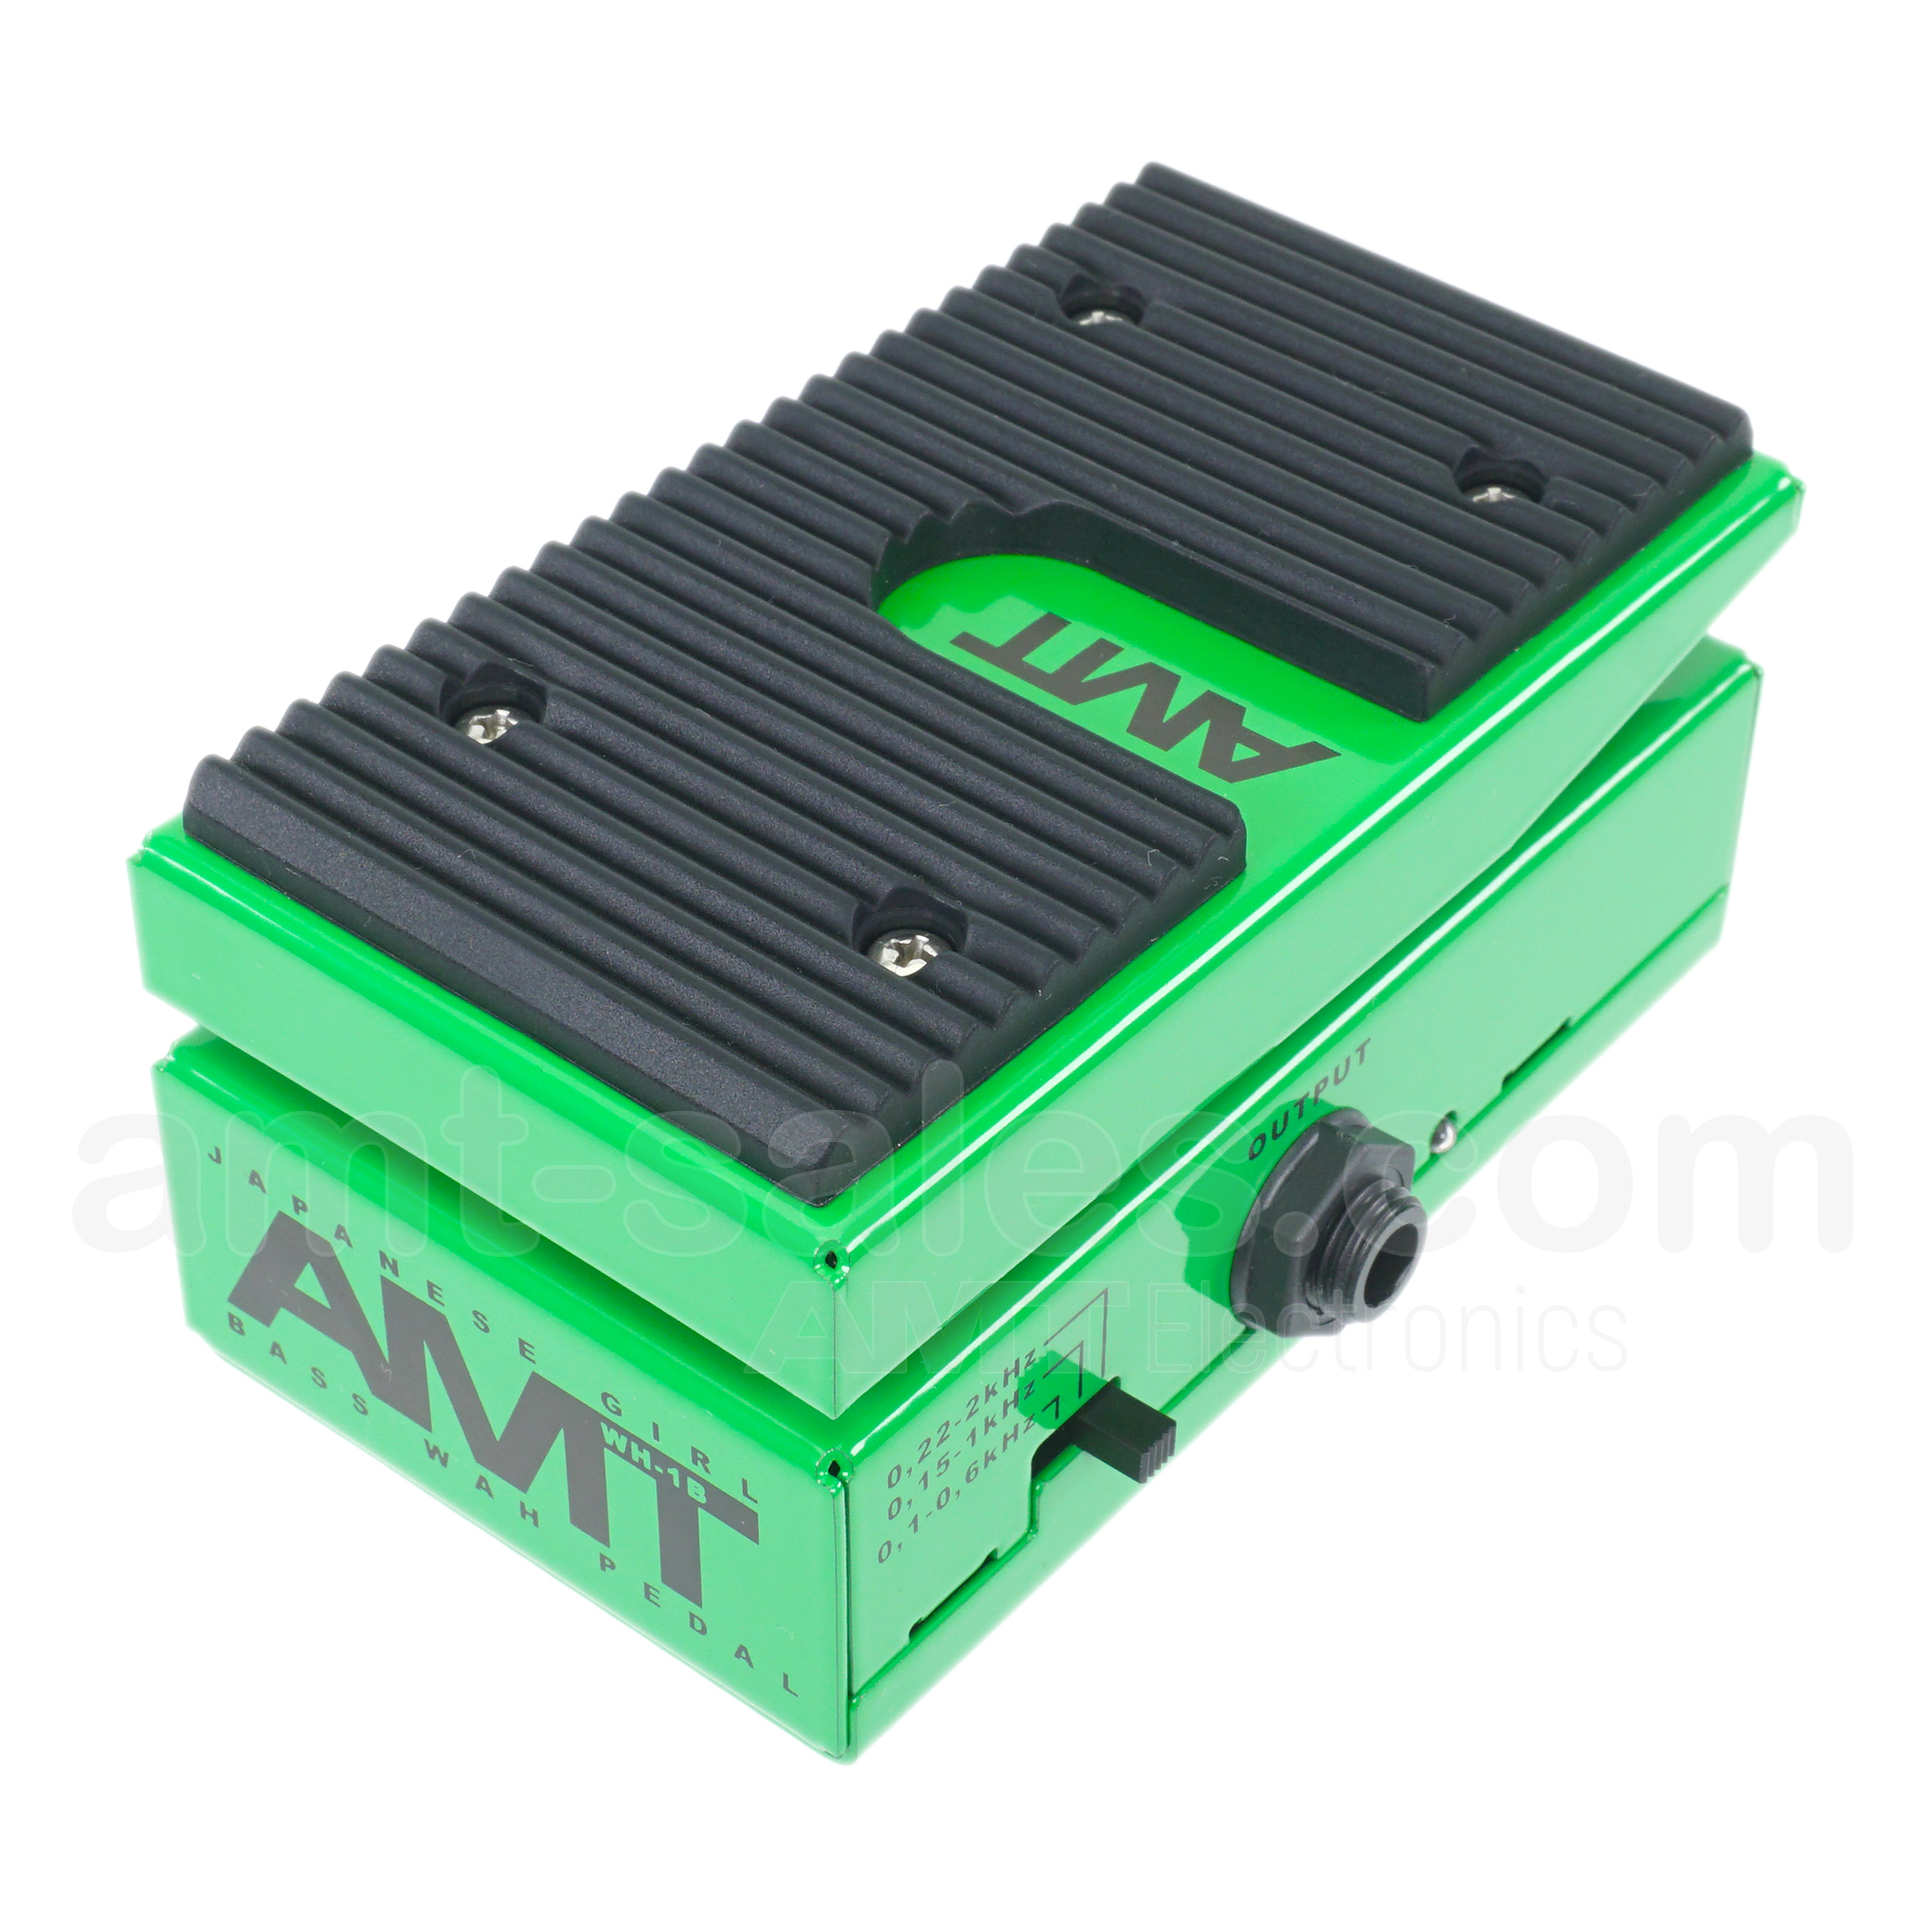 AMT WH-1B - Optical WAH-WAH pedal for bass